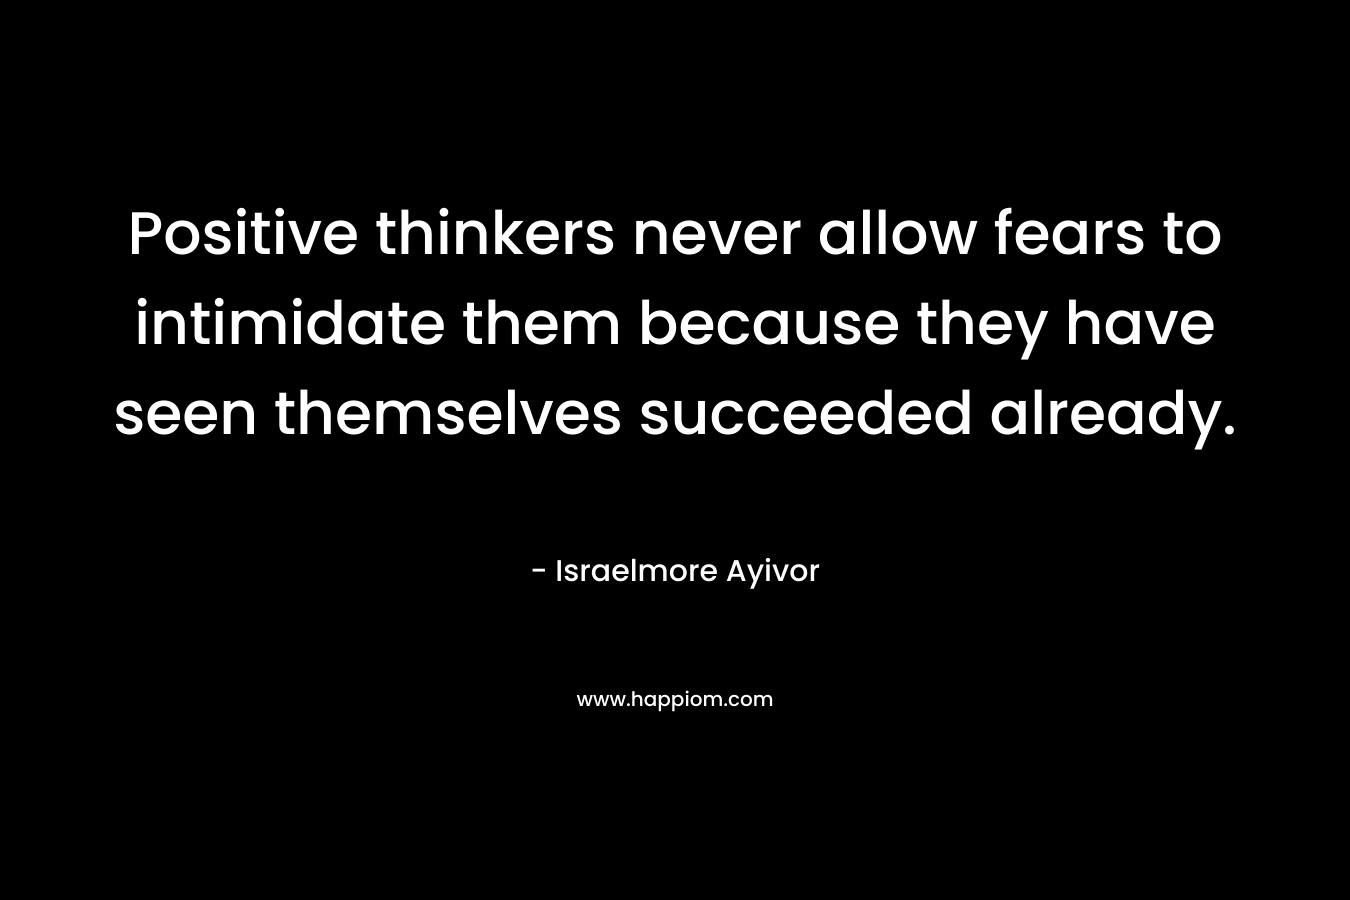 Positive thinkers never allow fears to intimidate them because they have seen themselves succeeded already. – Israelmore Ayivor